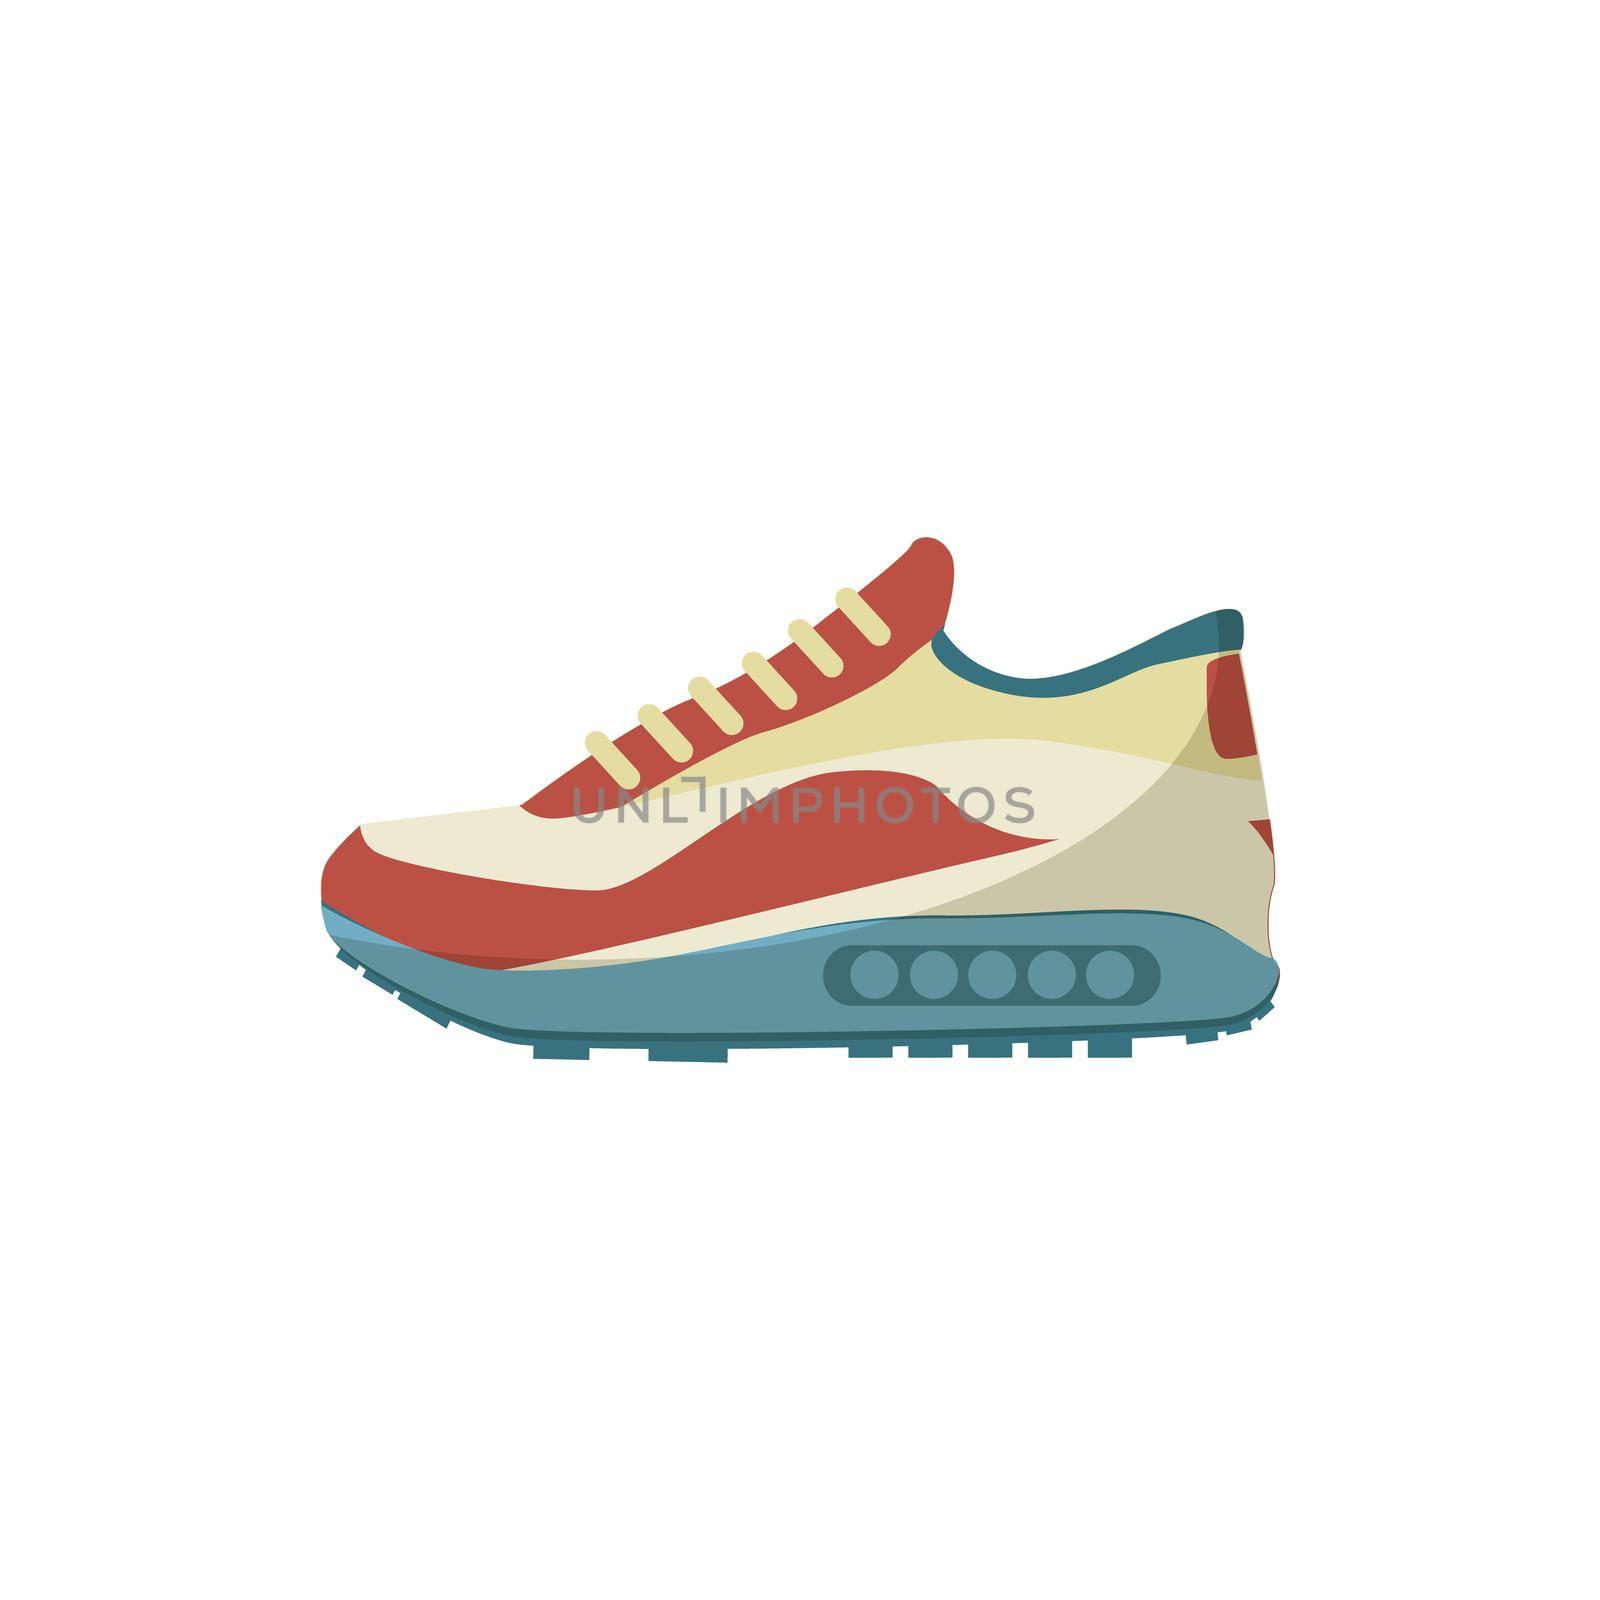 Sneakers icon, cartoon style by ylivdesign